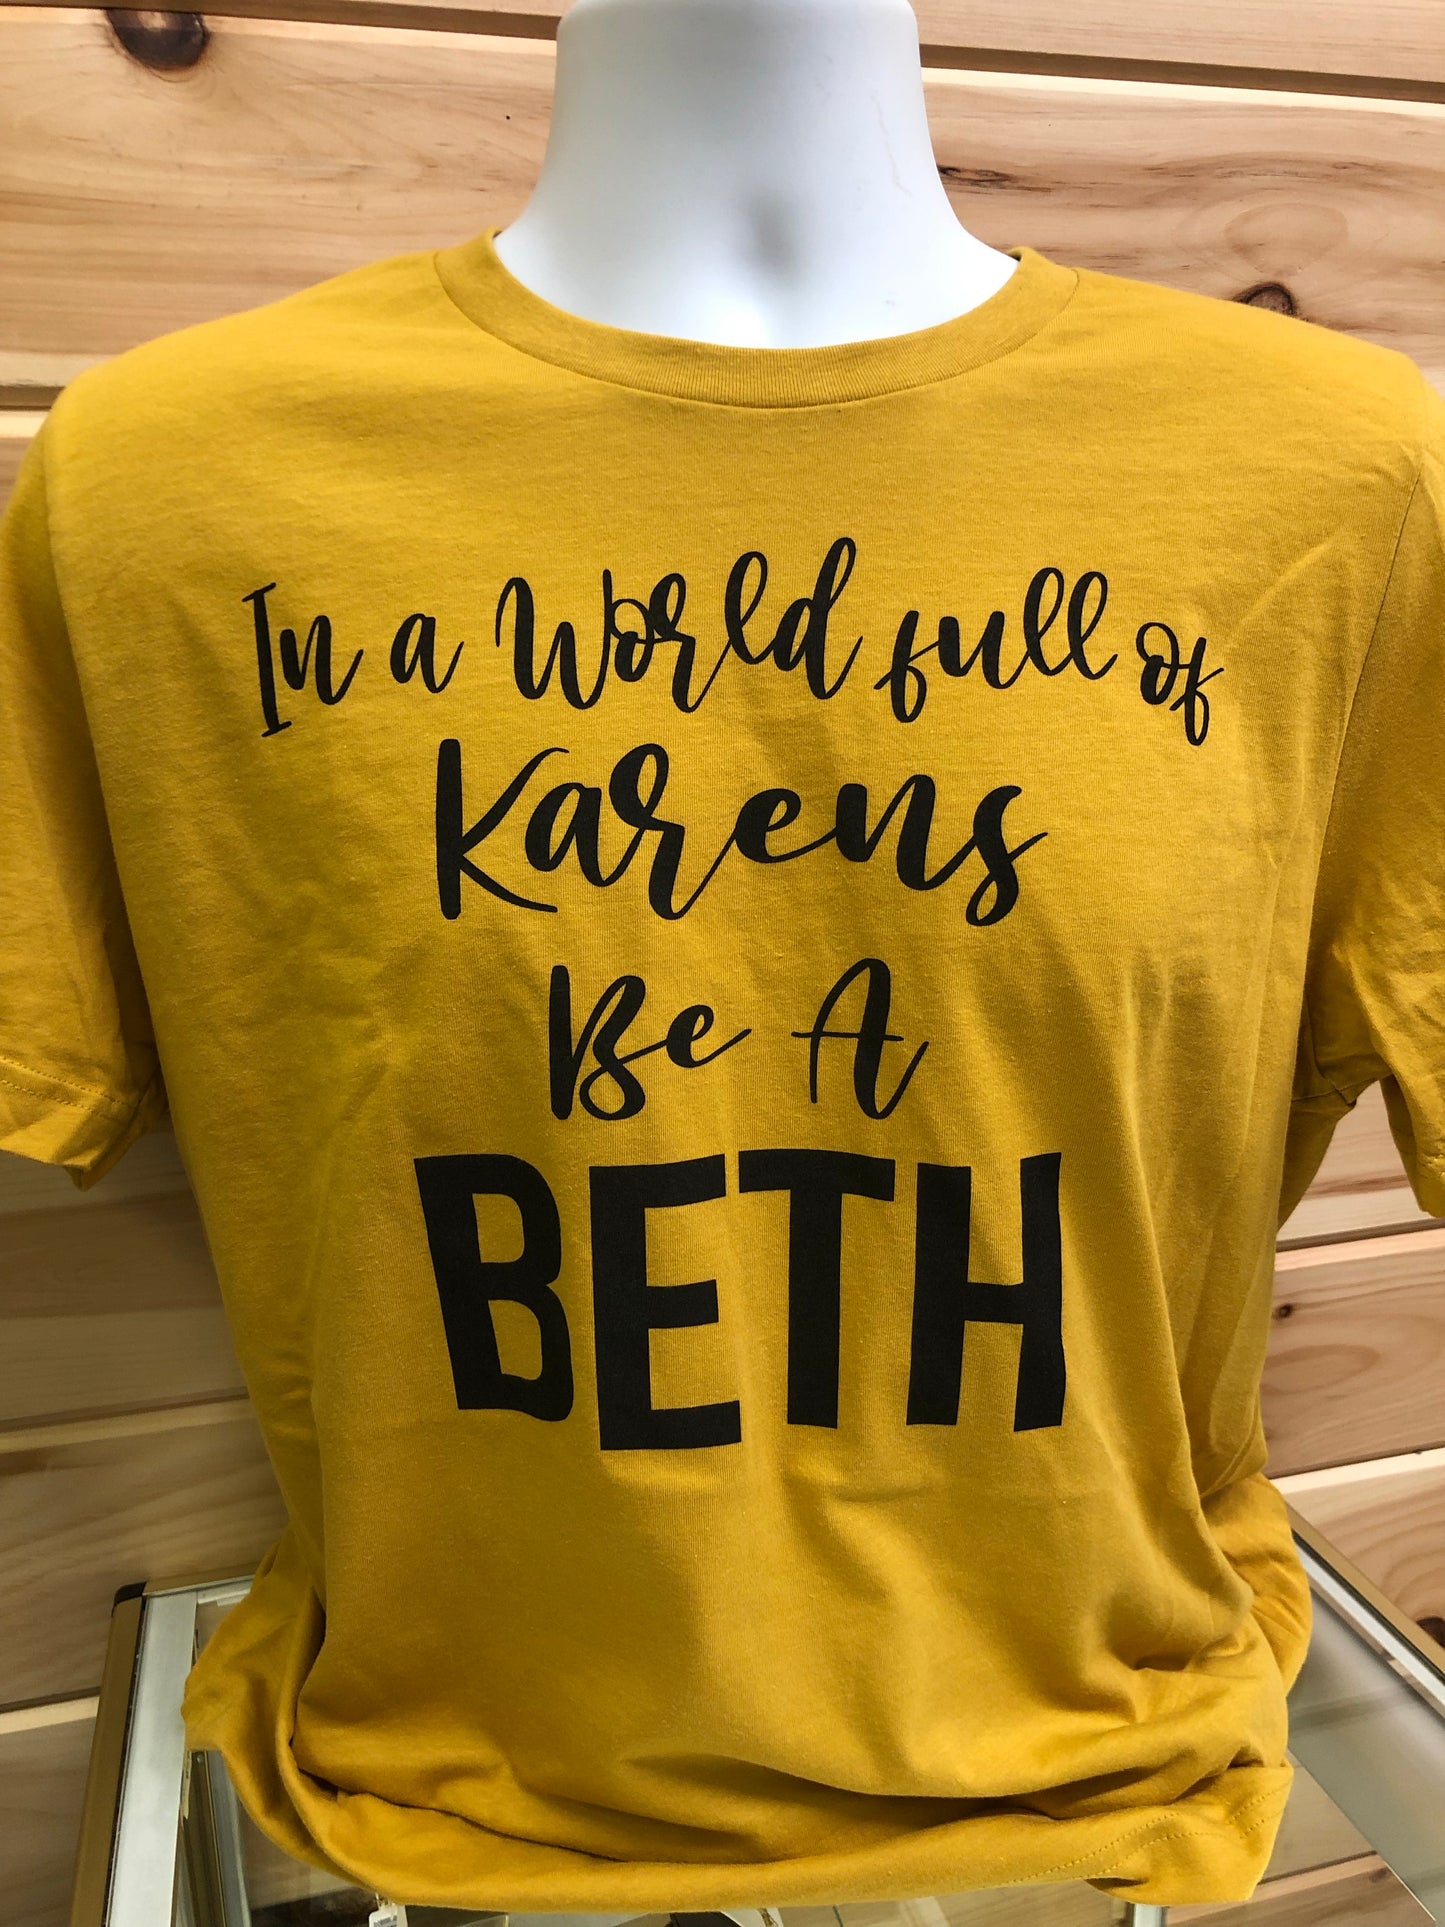 IN A WORLD FULL OF KARENS BE A BETH